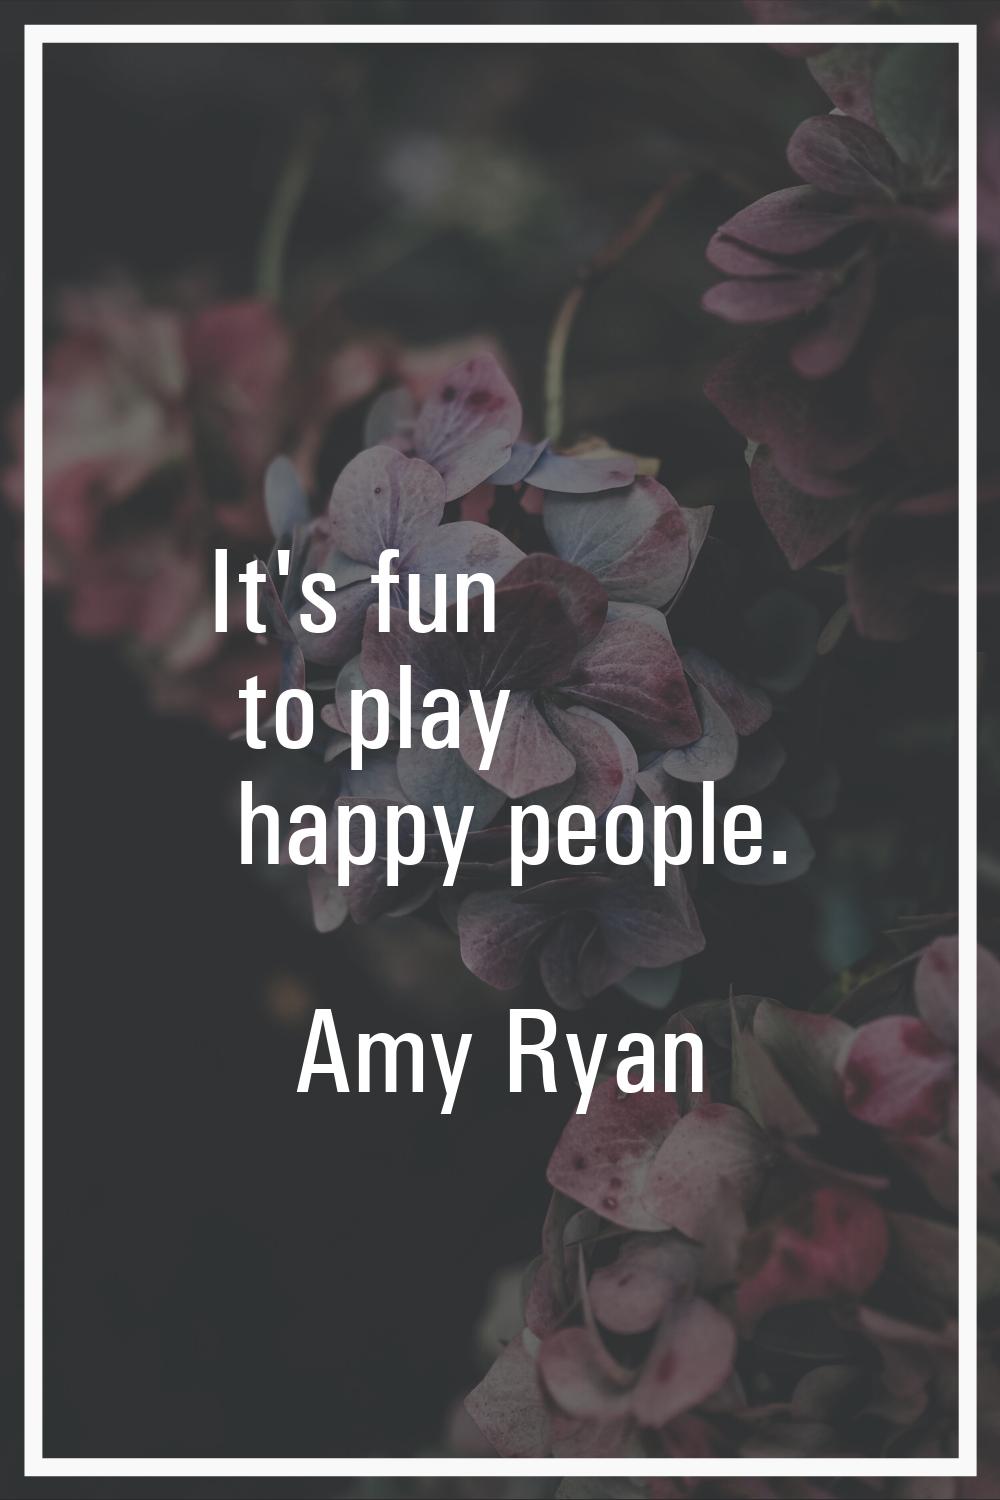 It's fun to play happy people.